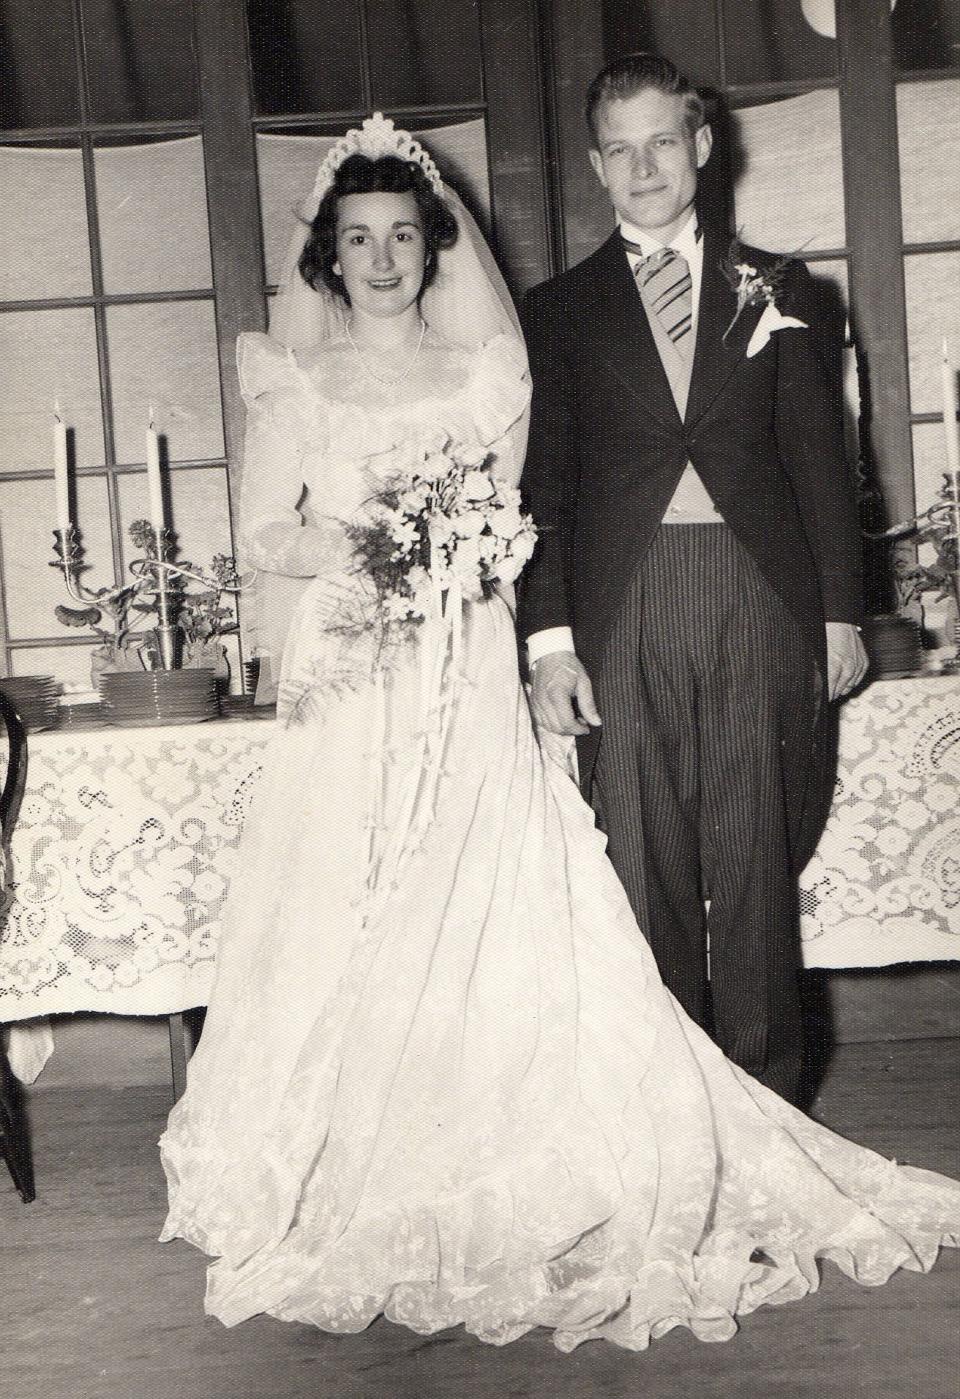 Merrill and Polly Leavens on their wedding day June 19, 1948 at the Star of the Sea Church in Squantum. The couple renewed their vows on their 75th anniversary in 2023.